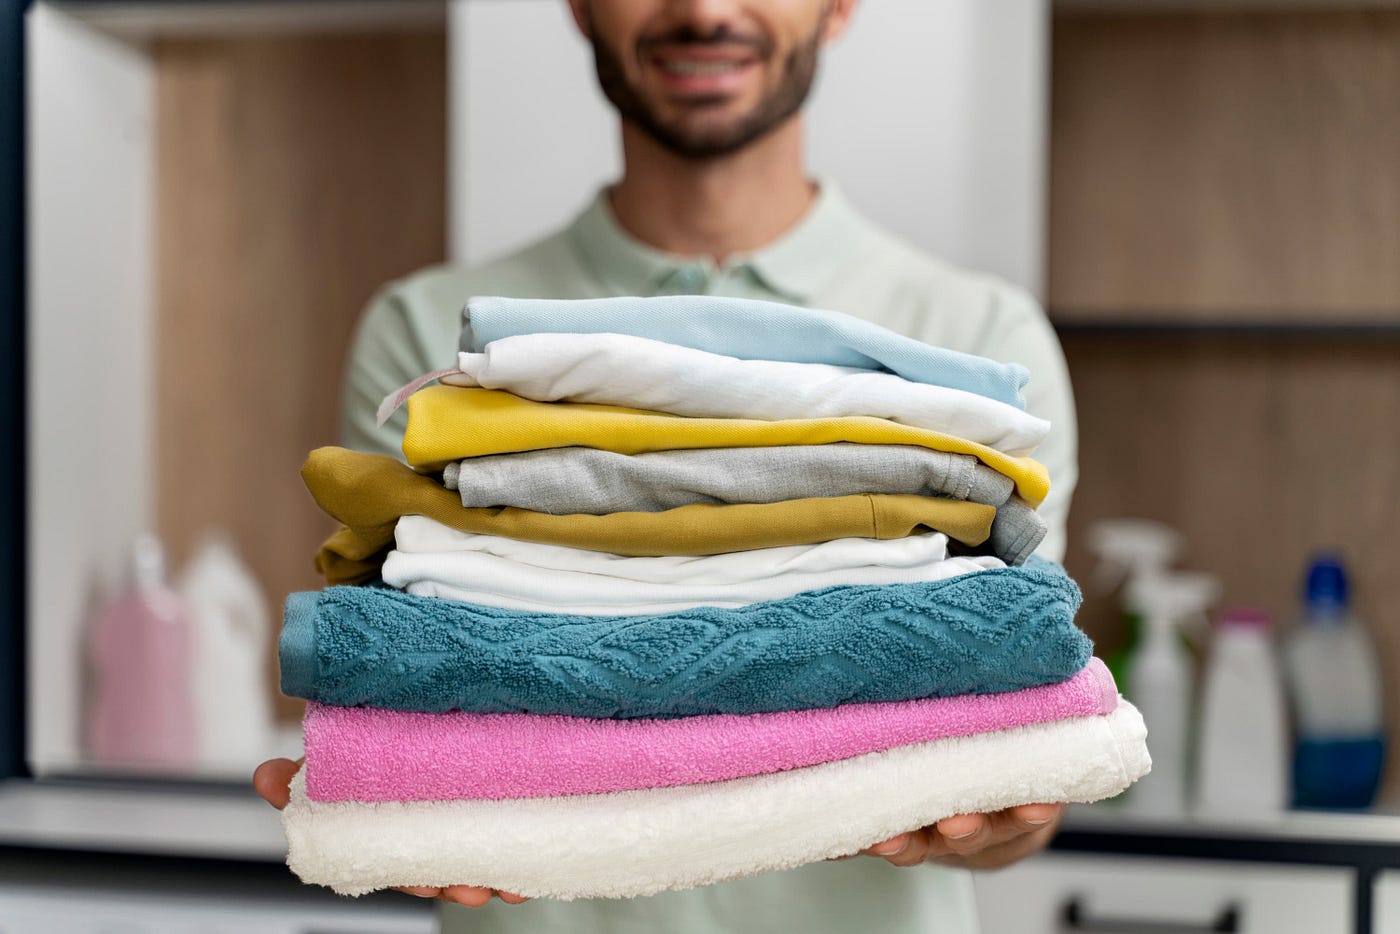 Professional Laundry Services